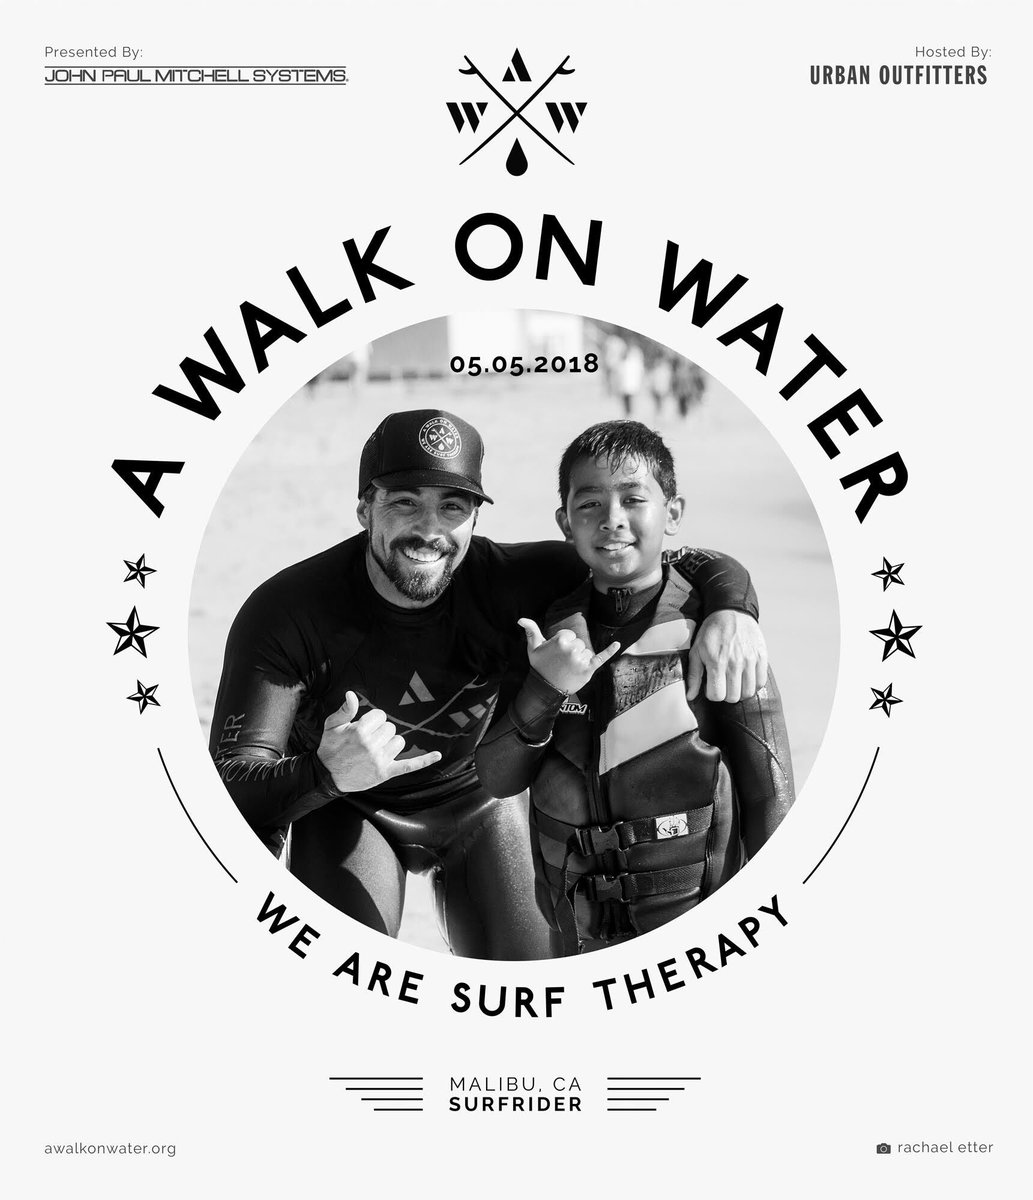 Come join us this Saturday to cheer for some amazing athletes.  #awow #awowmalibu #surftherapy #sharethestoke @awalkonwater1